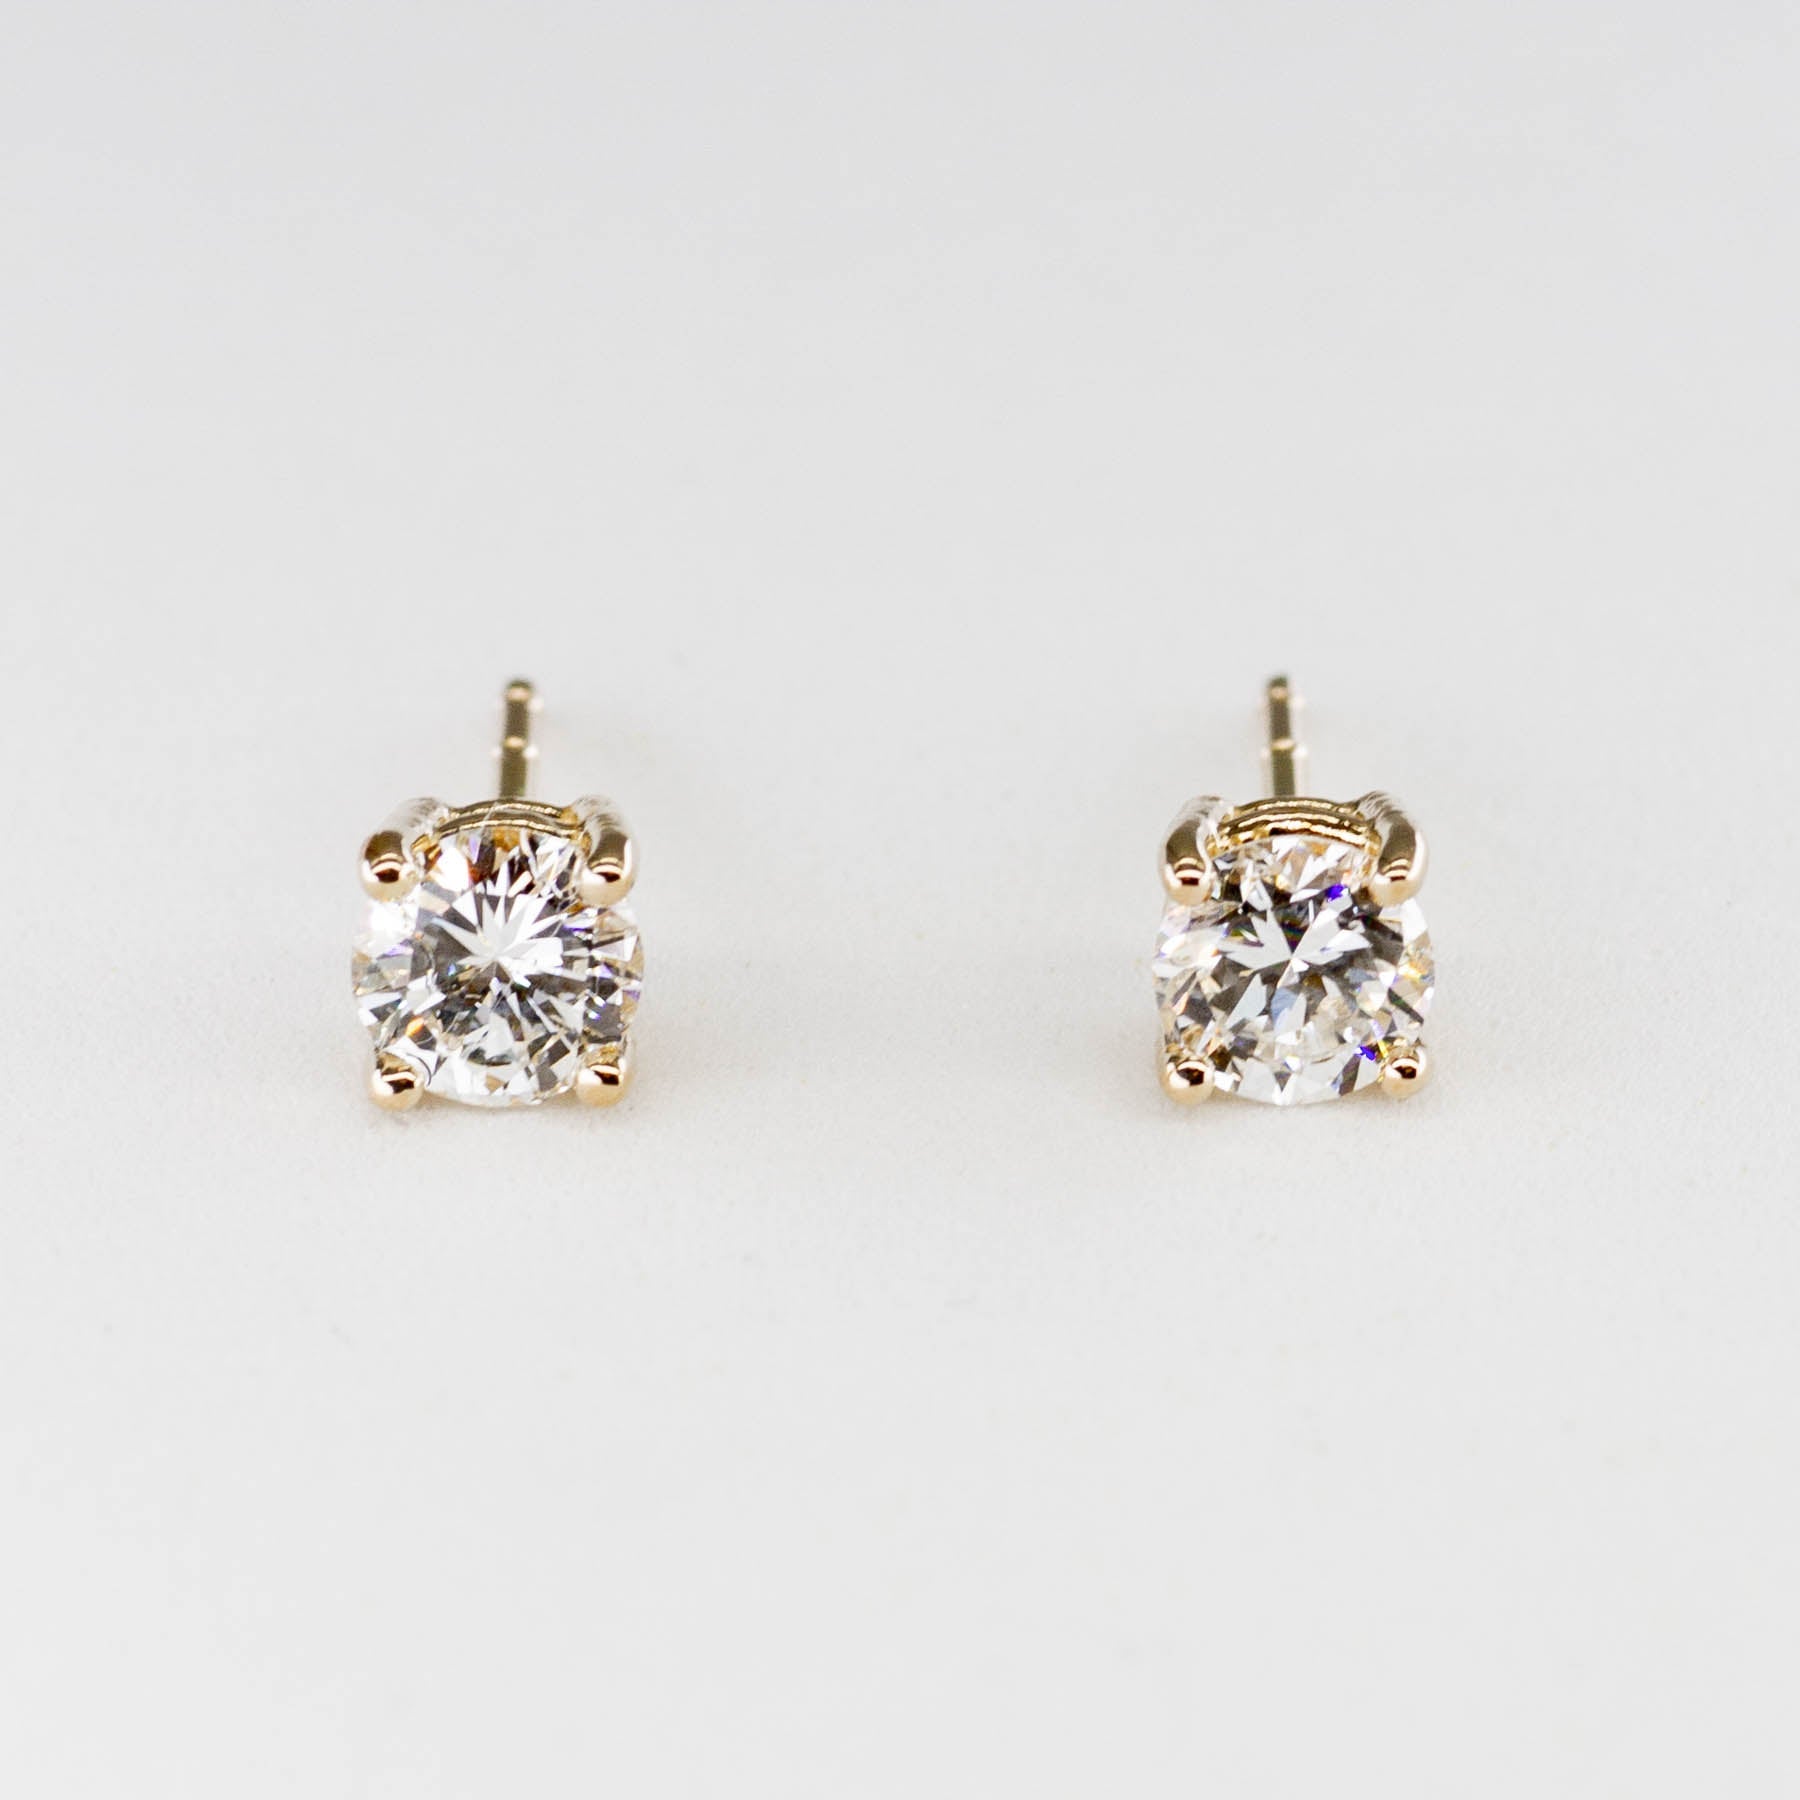 '100 Ways' Diamond Studs in White or Yellow Gold | 2/3 carat | Options Available | - 100 Ways